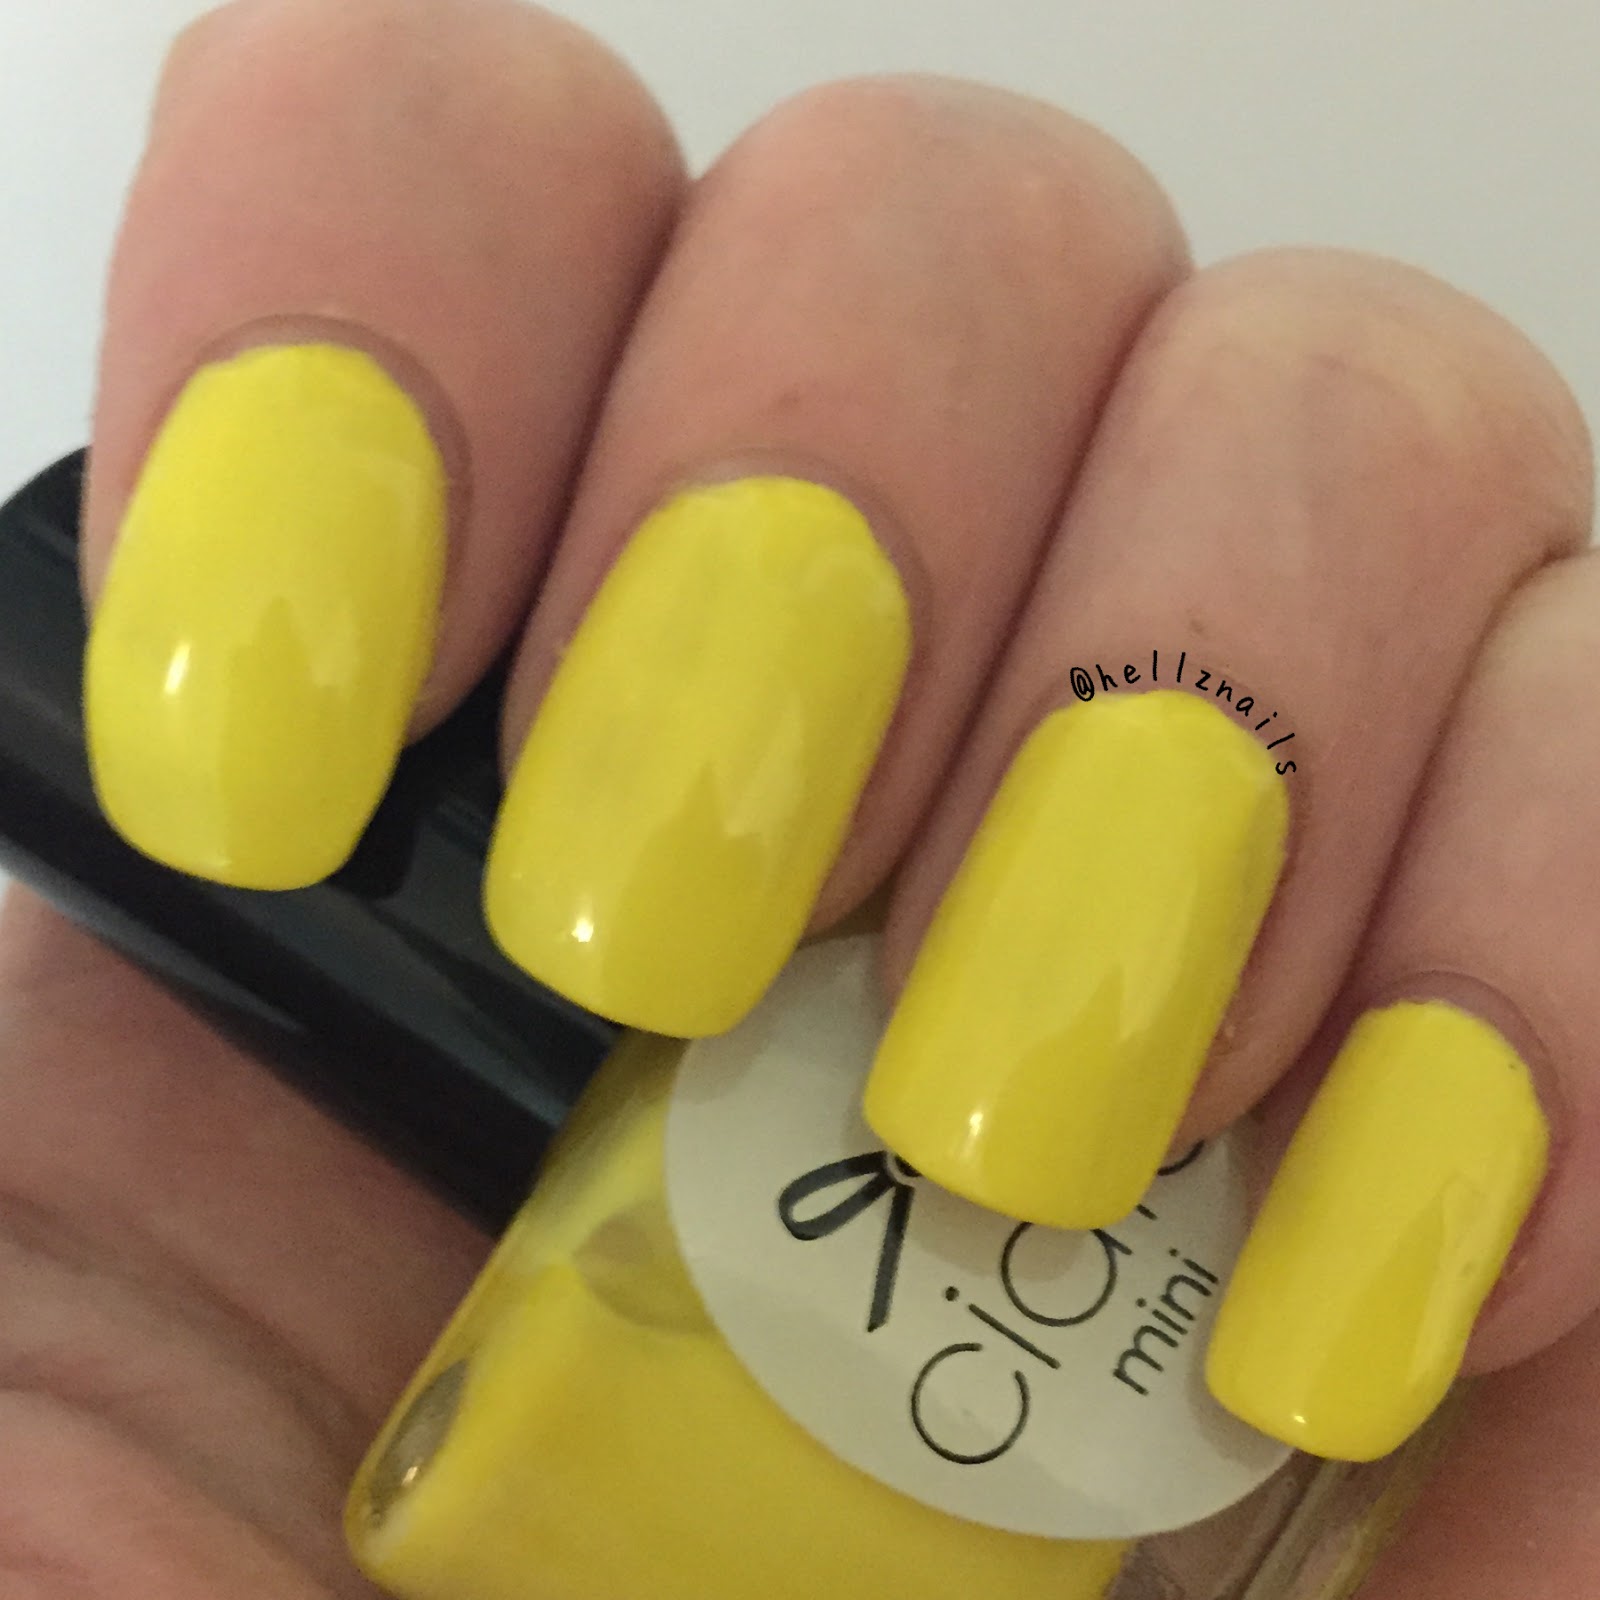 January untried nail polish swatches - Ciate - Big Yellow Taxi - Hellz ...